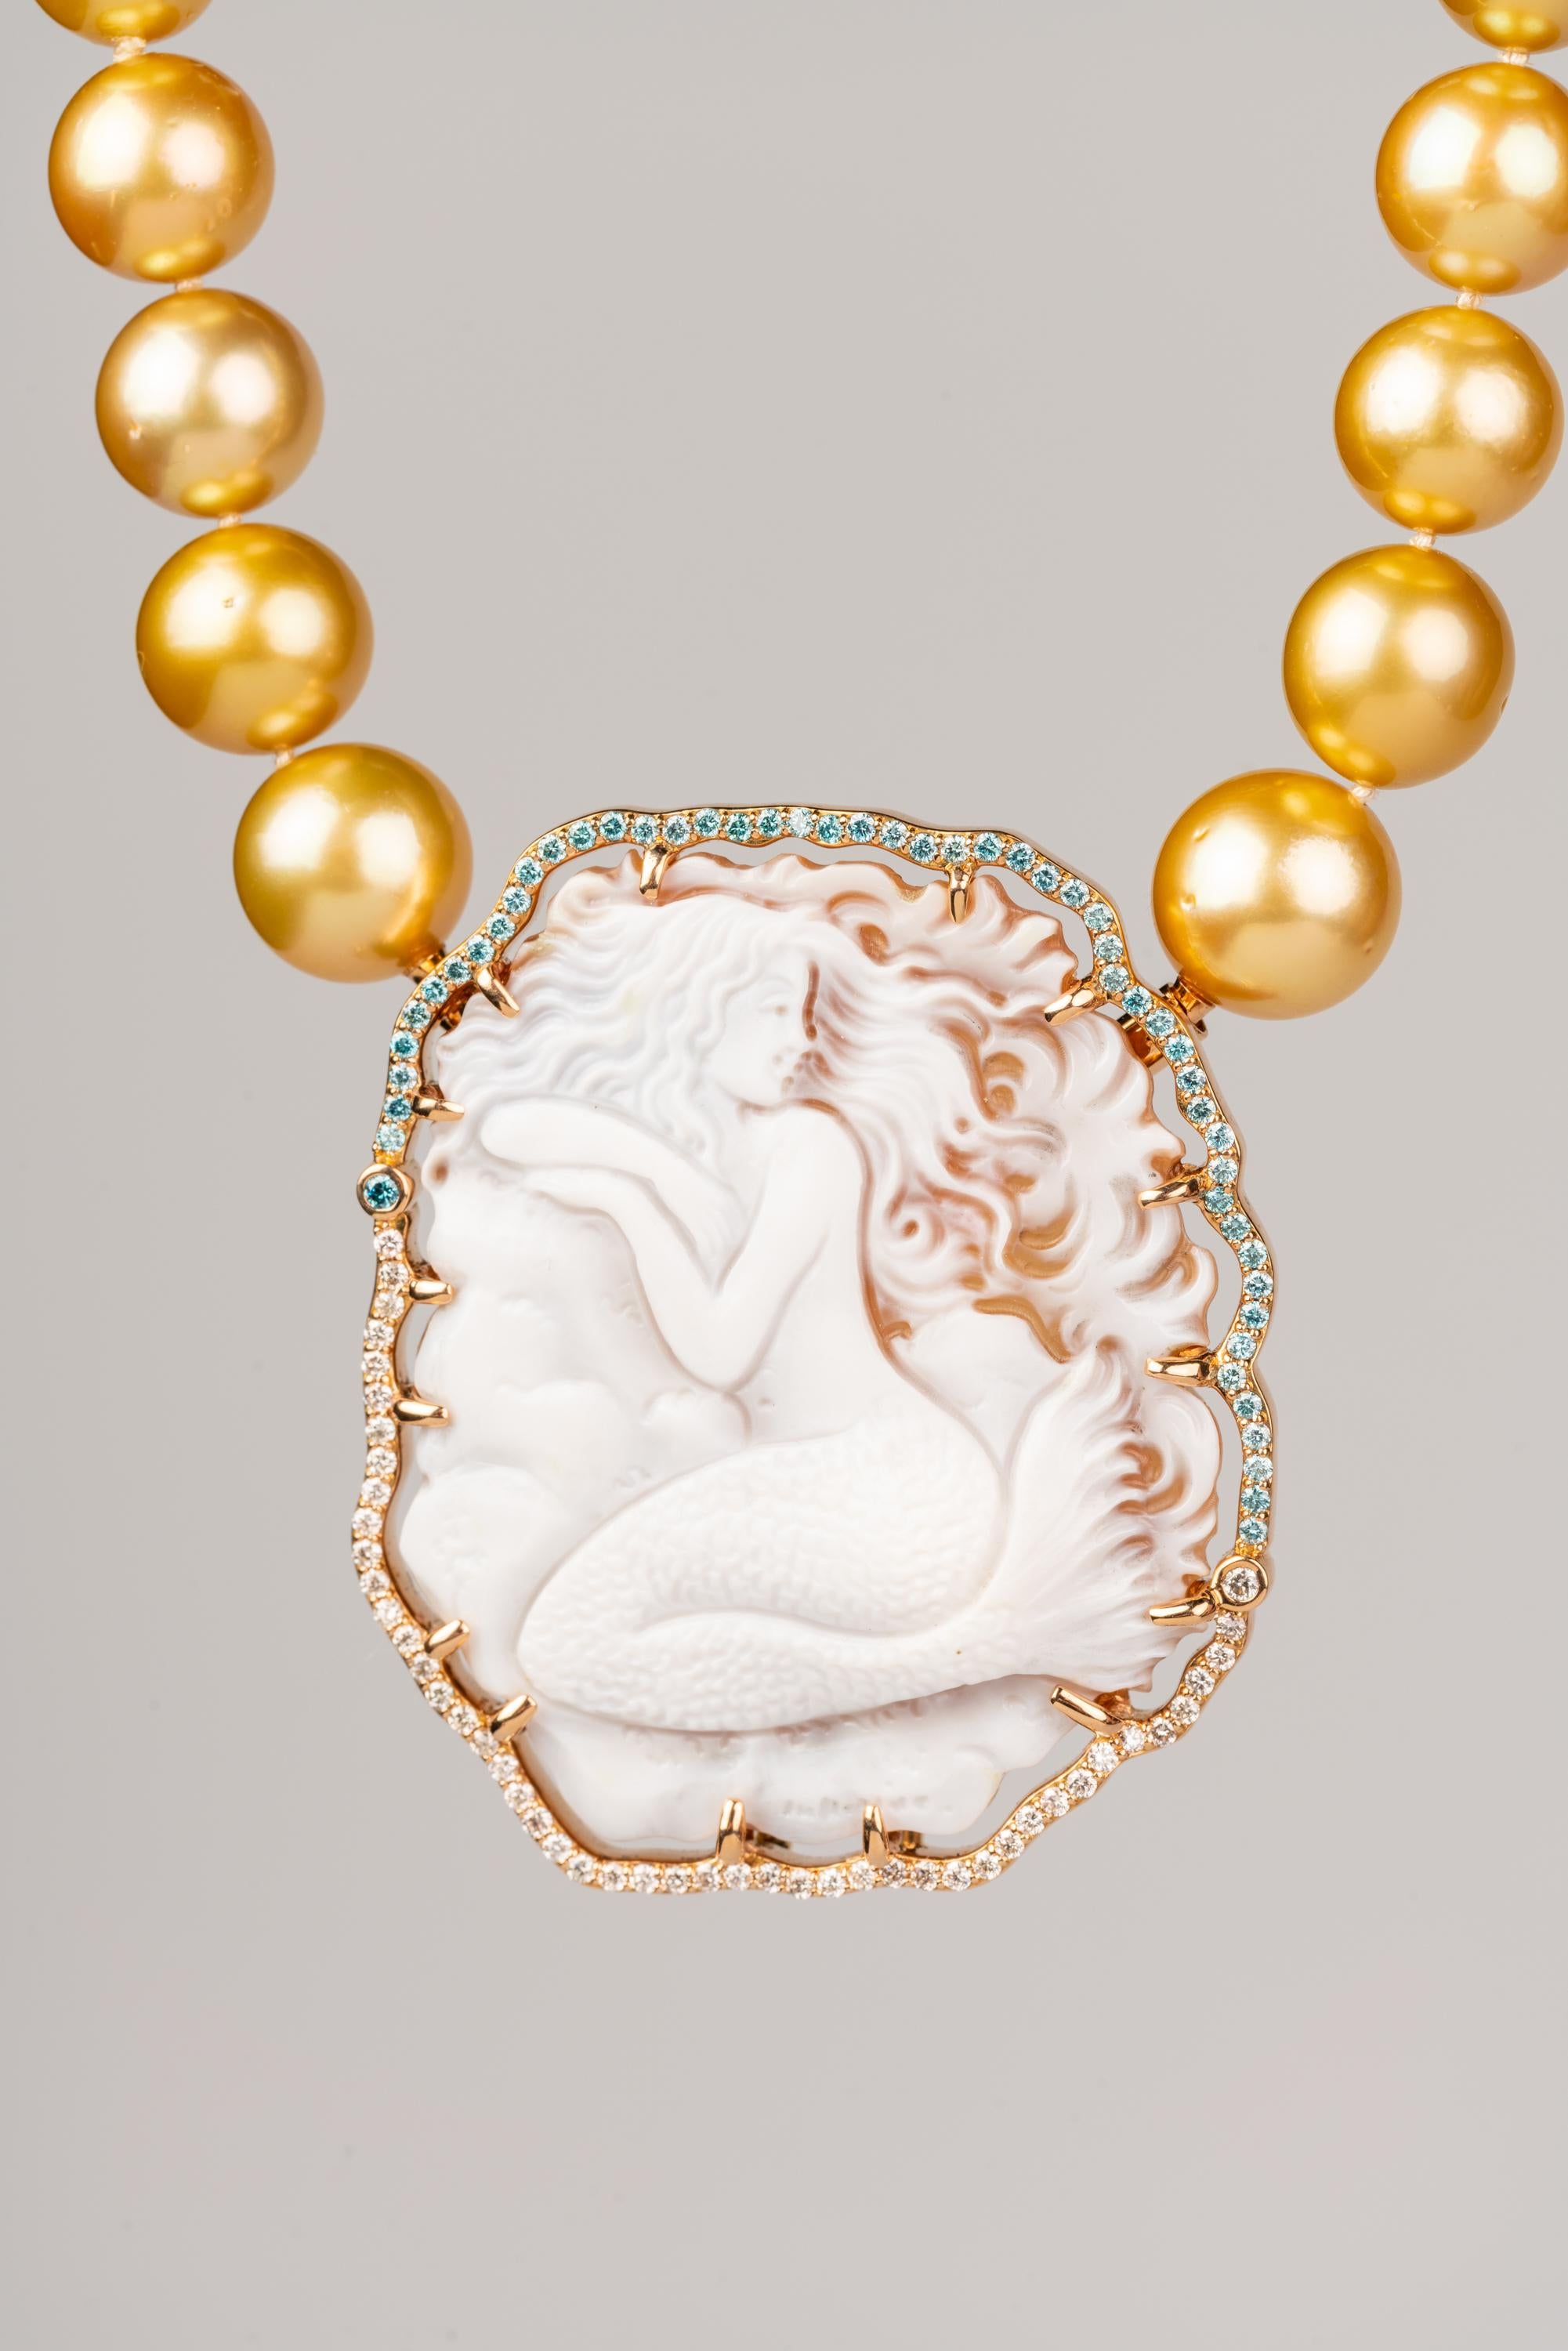 An 18k rose gold clasp and brooch prong set with an Italian carved agate mermaid cameo with one 2mm and fifty one top light brown diamonds for a total of .8 carats, and one 2mm, one 1mm, and forty seven 1.5mm aqua blue diamonds for a total of .73